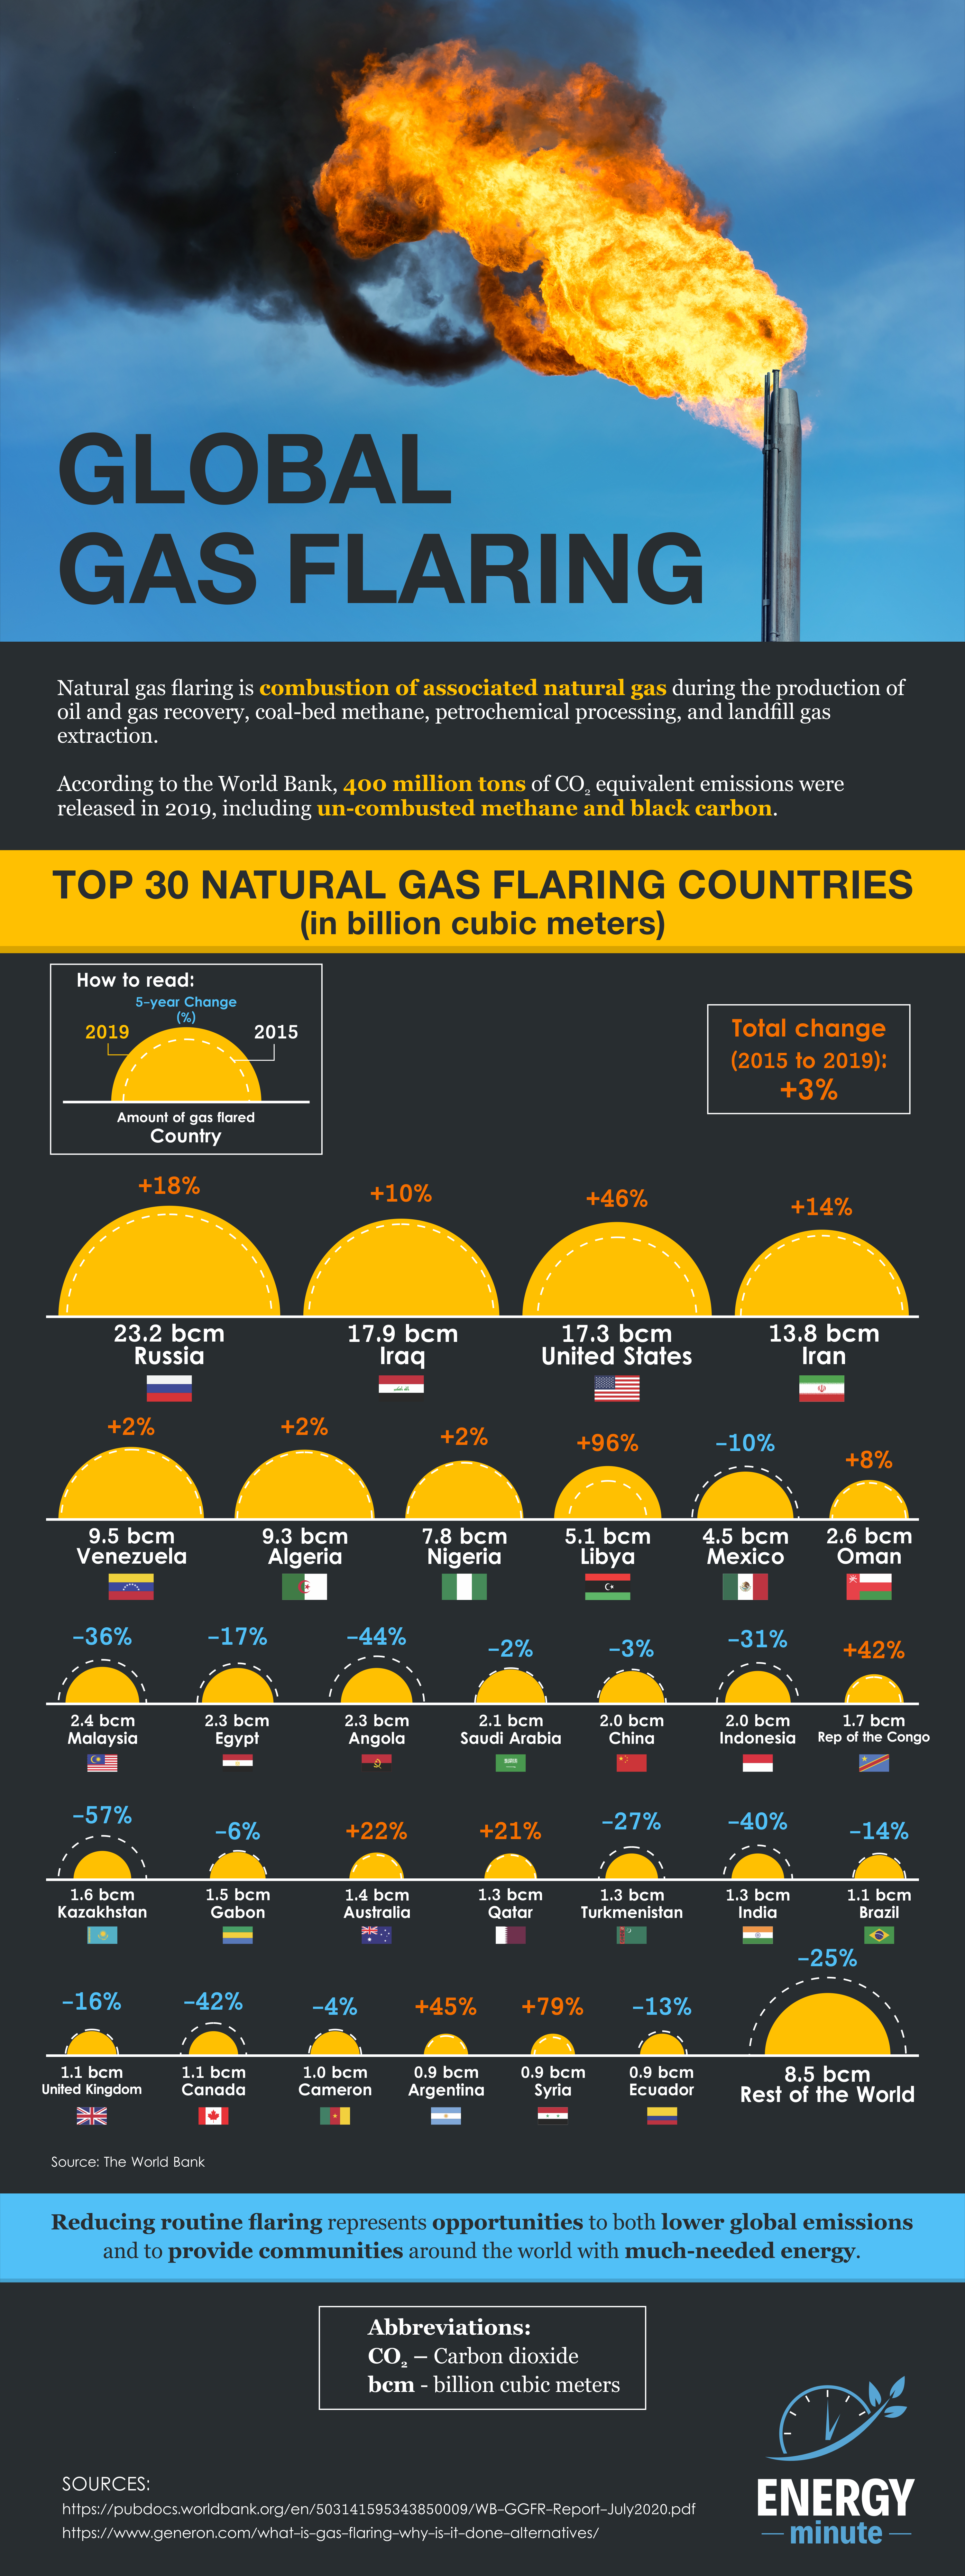 Top 30 Global Natural Gas Flaring Countries